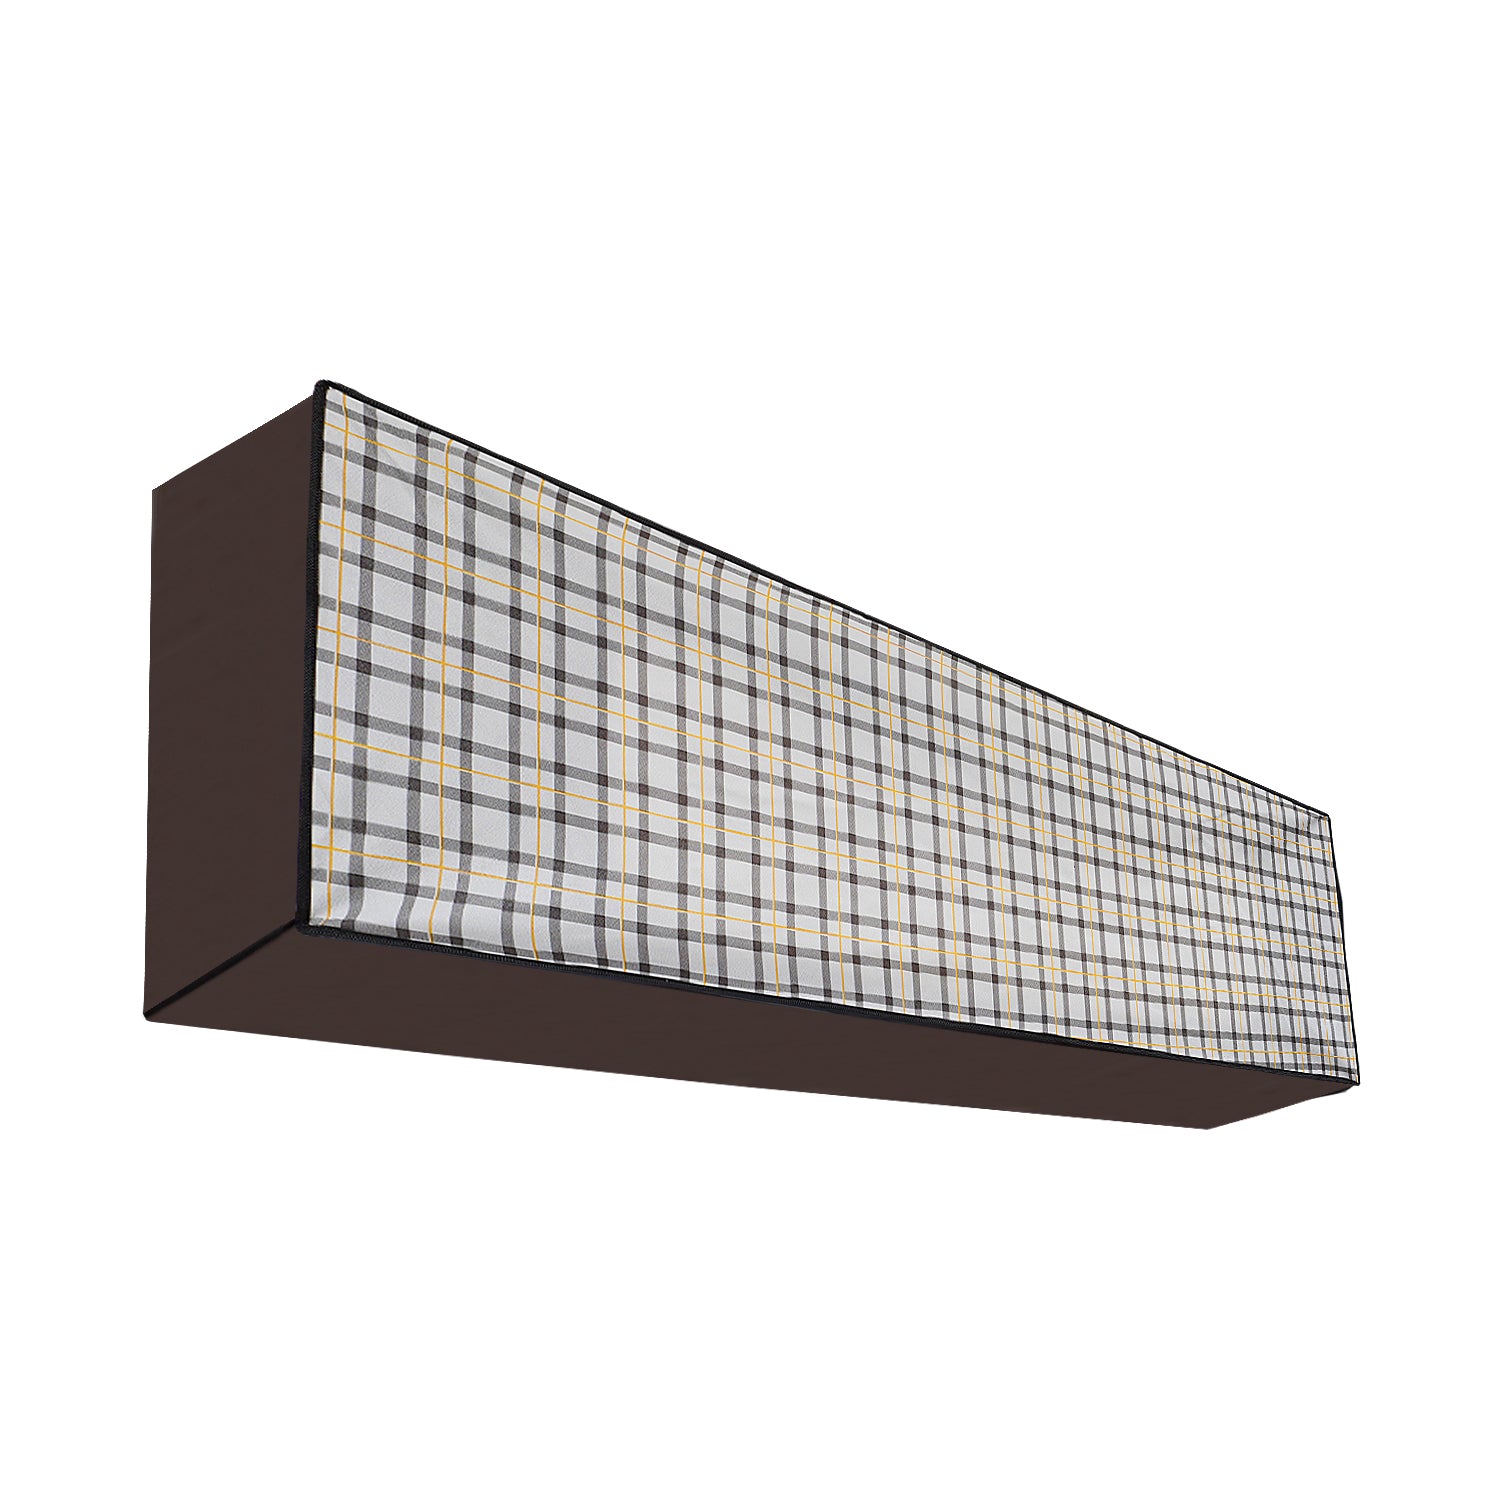 Waterproof and Dustproof Split Indoor AC Cover, CA04 - Dream Care Furnishings Private Limited